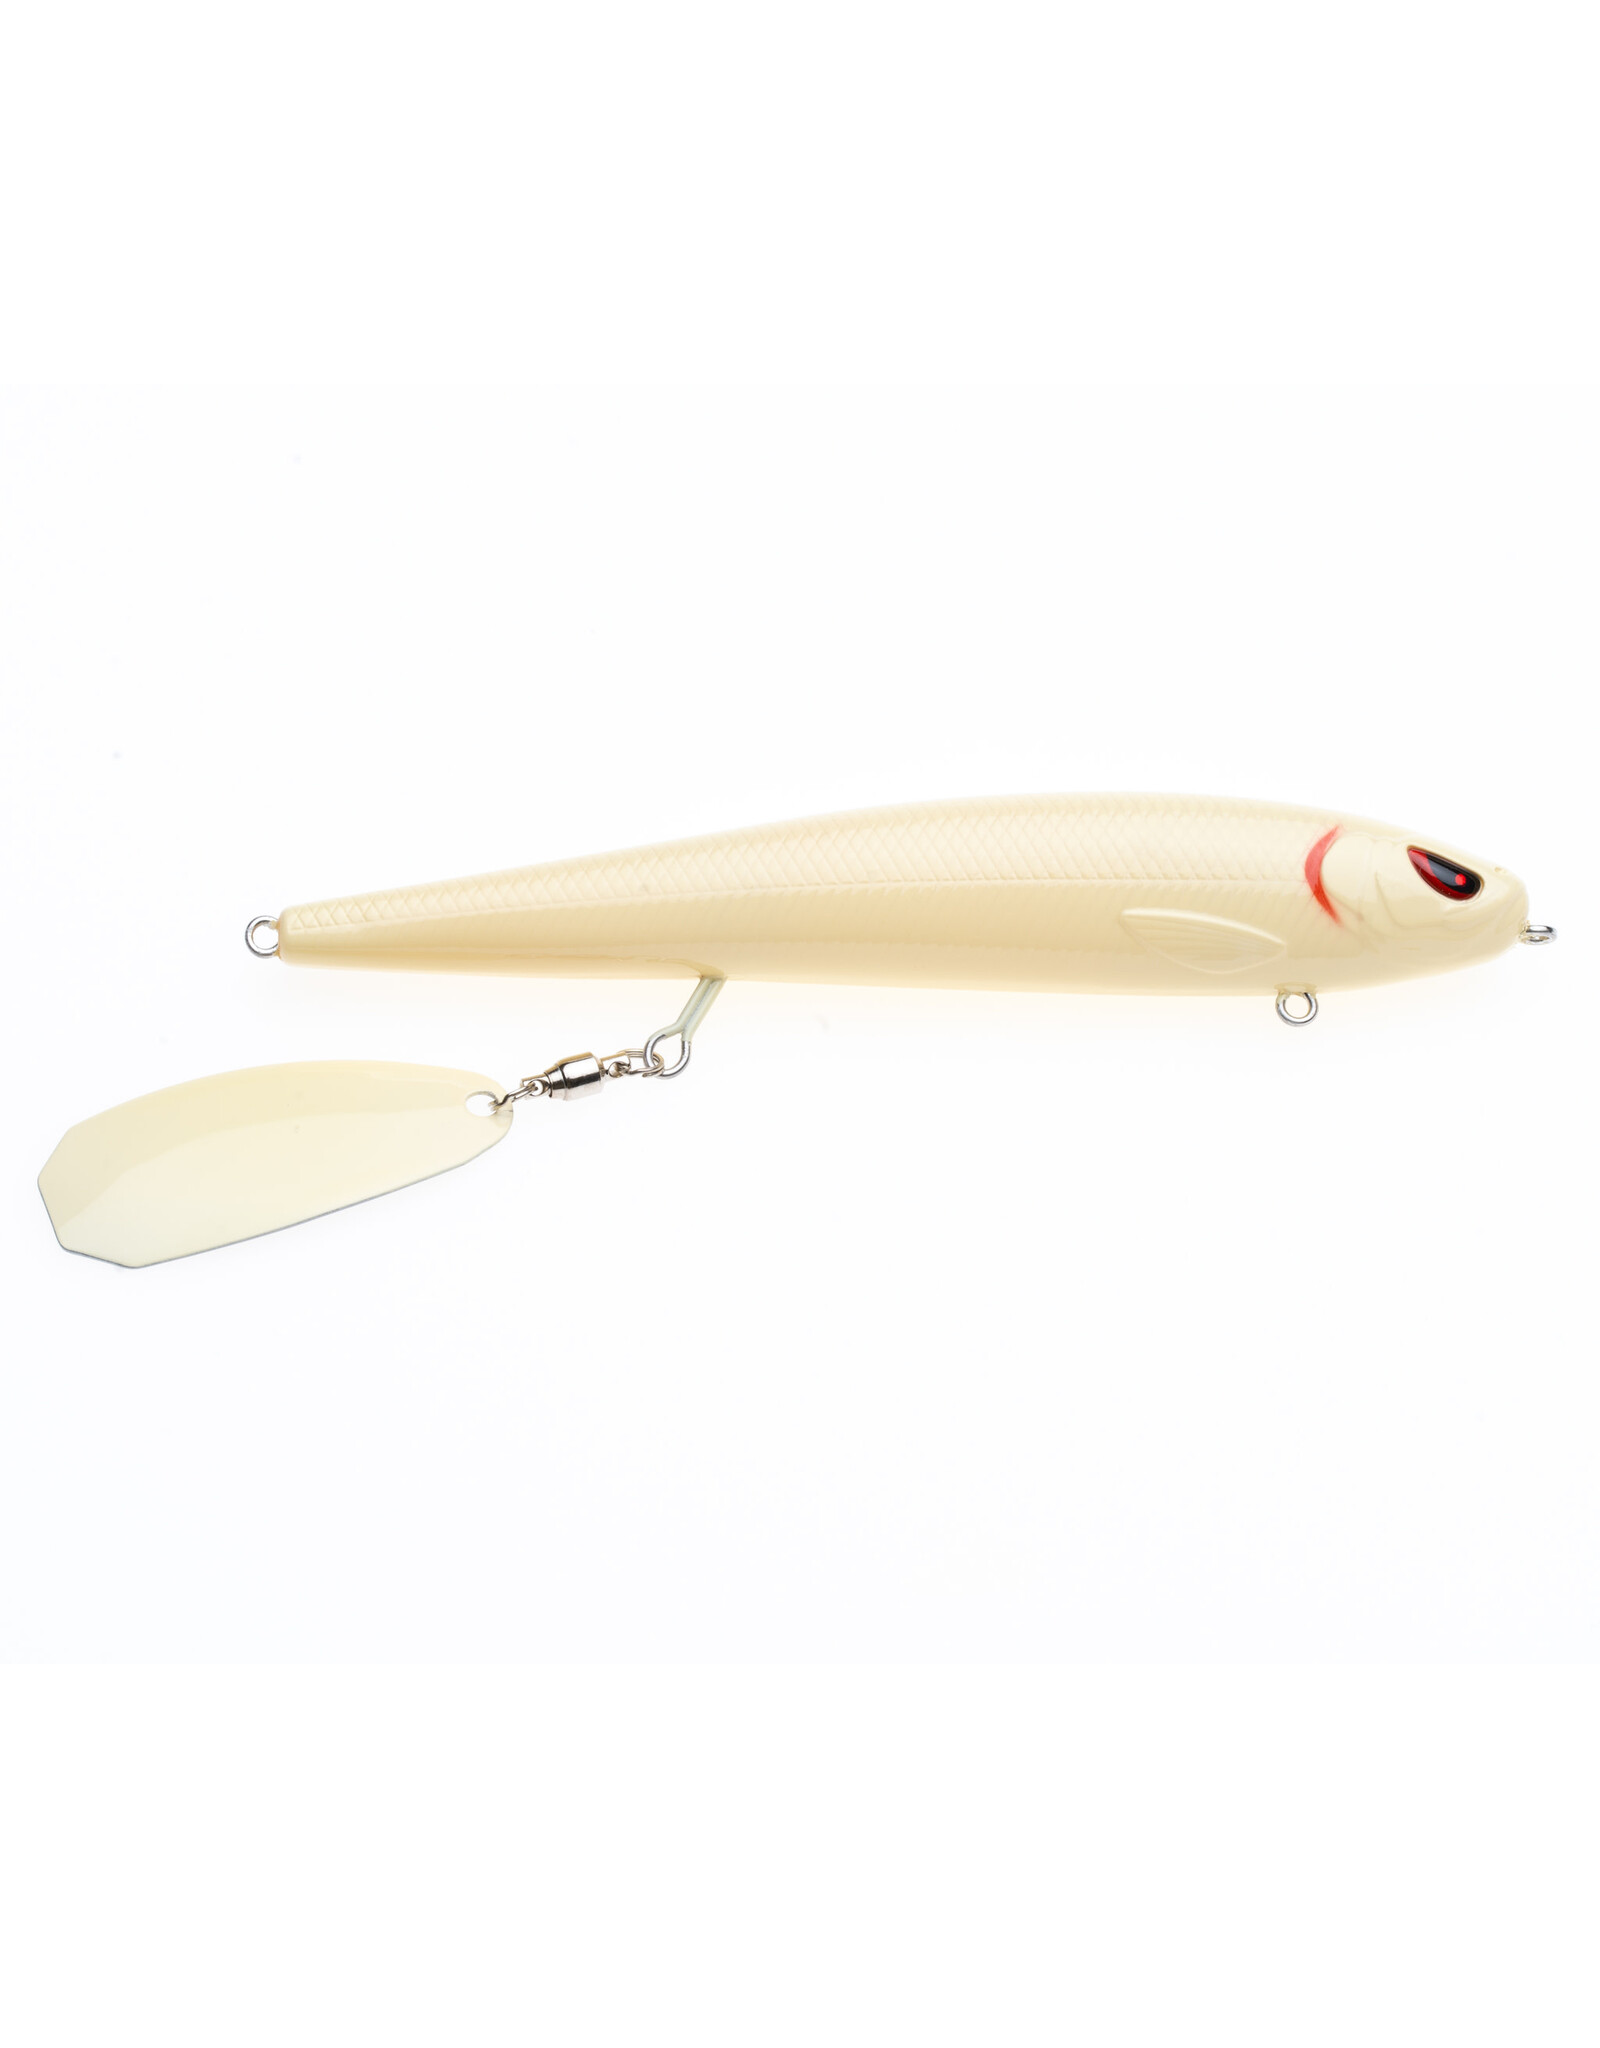 Freedom Tackle Mischief Minnow Clacking Topwater 3.5 - Bronson